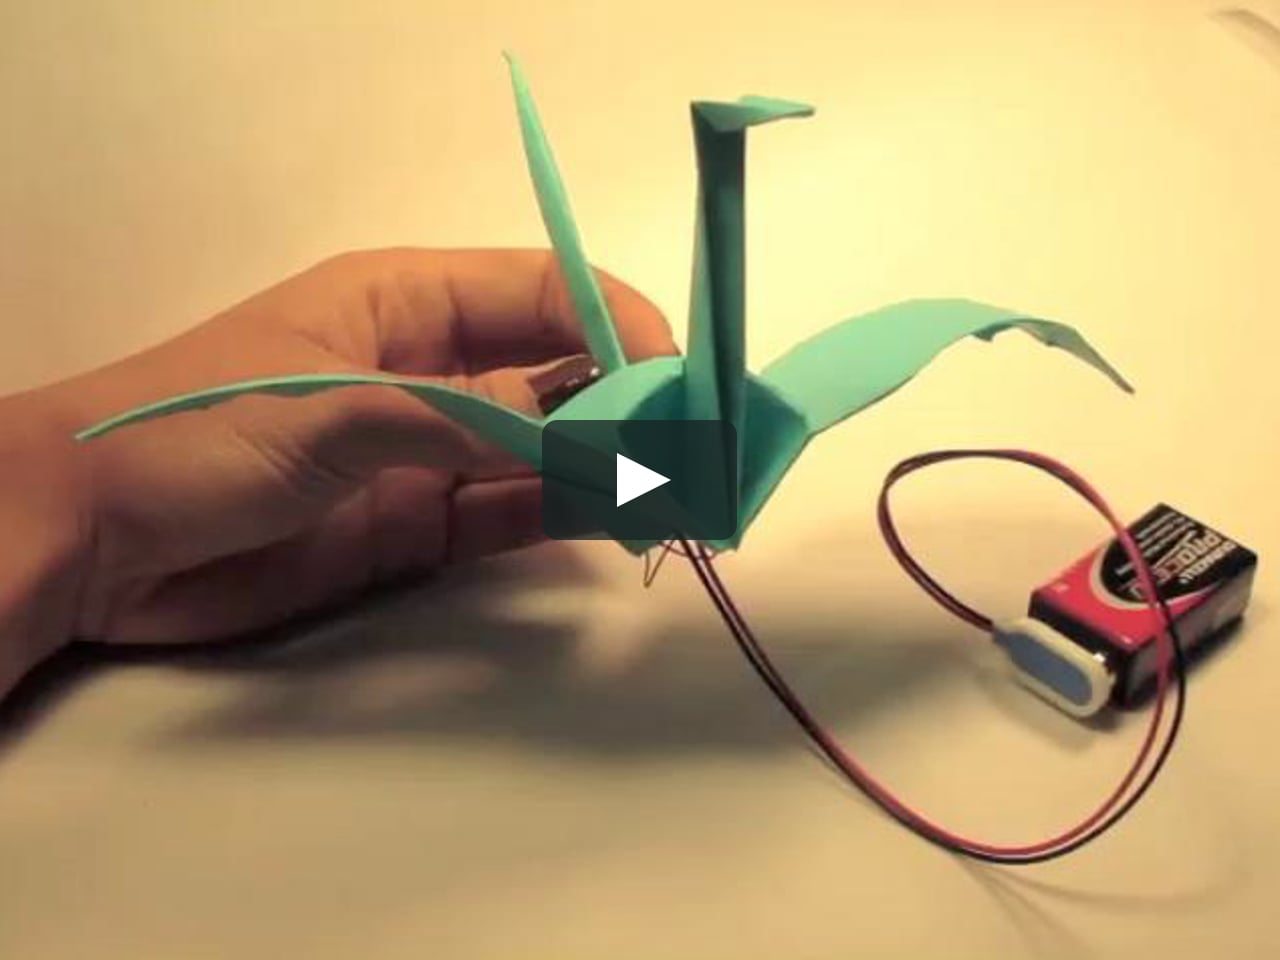 Flapping Swan Origami Electronic Origami Flapping Crane W Tutorial